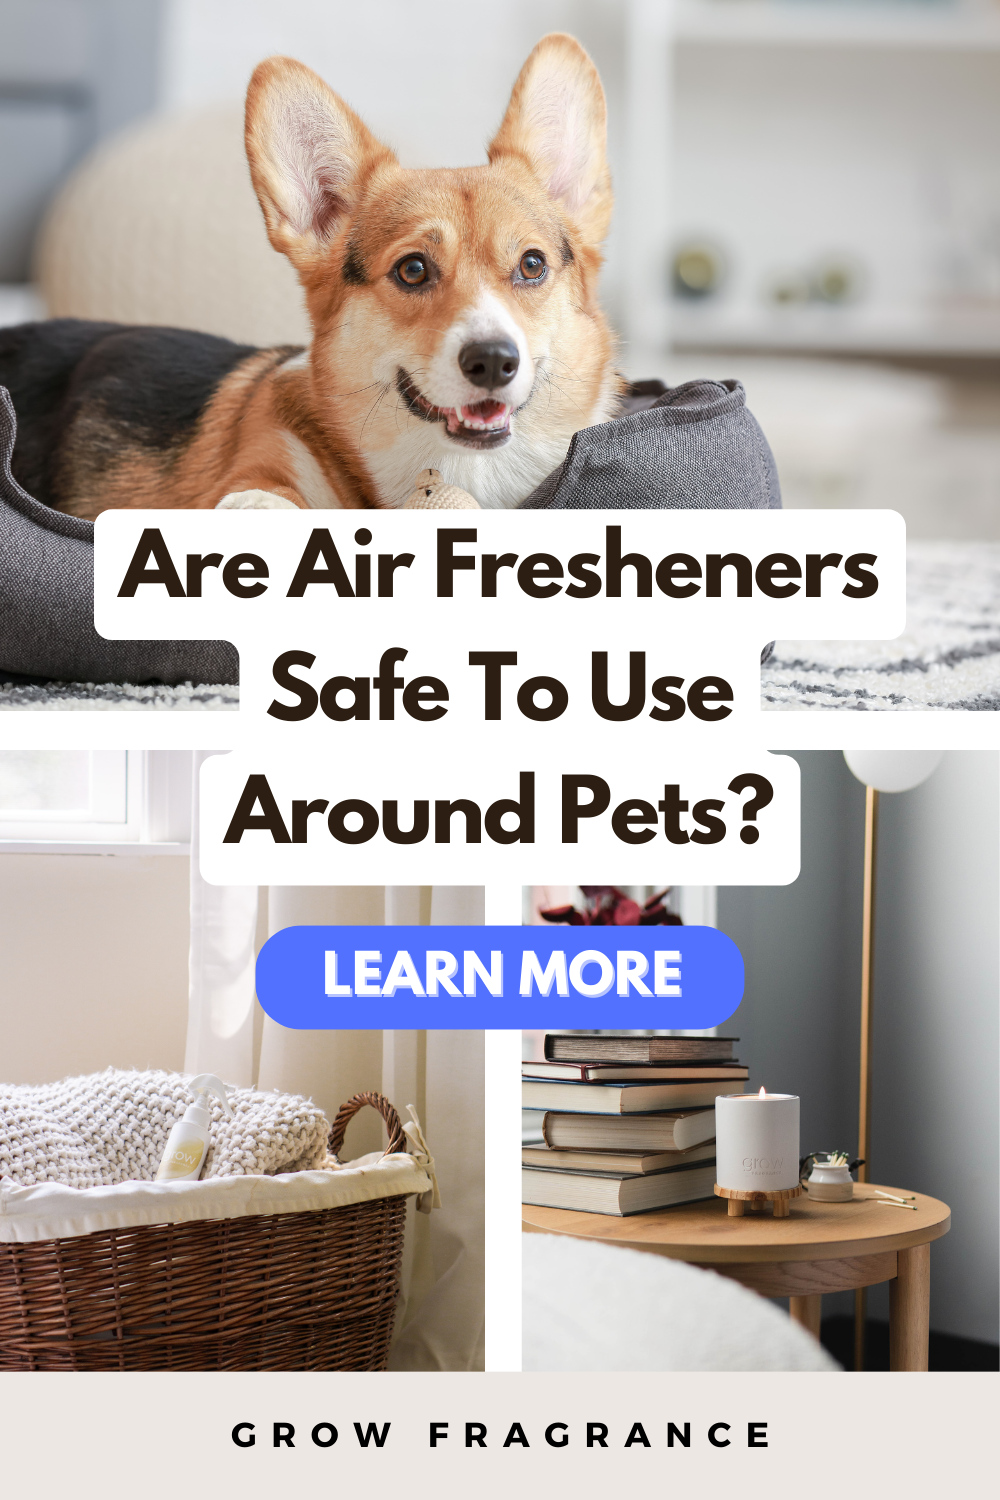 An adorable Corgi comfortably resting in a spotless living room, complemented by the gentle fragrance of a safe air freshener on the nearby shelf.